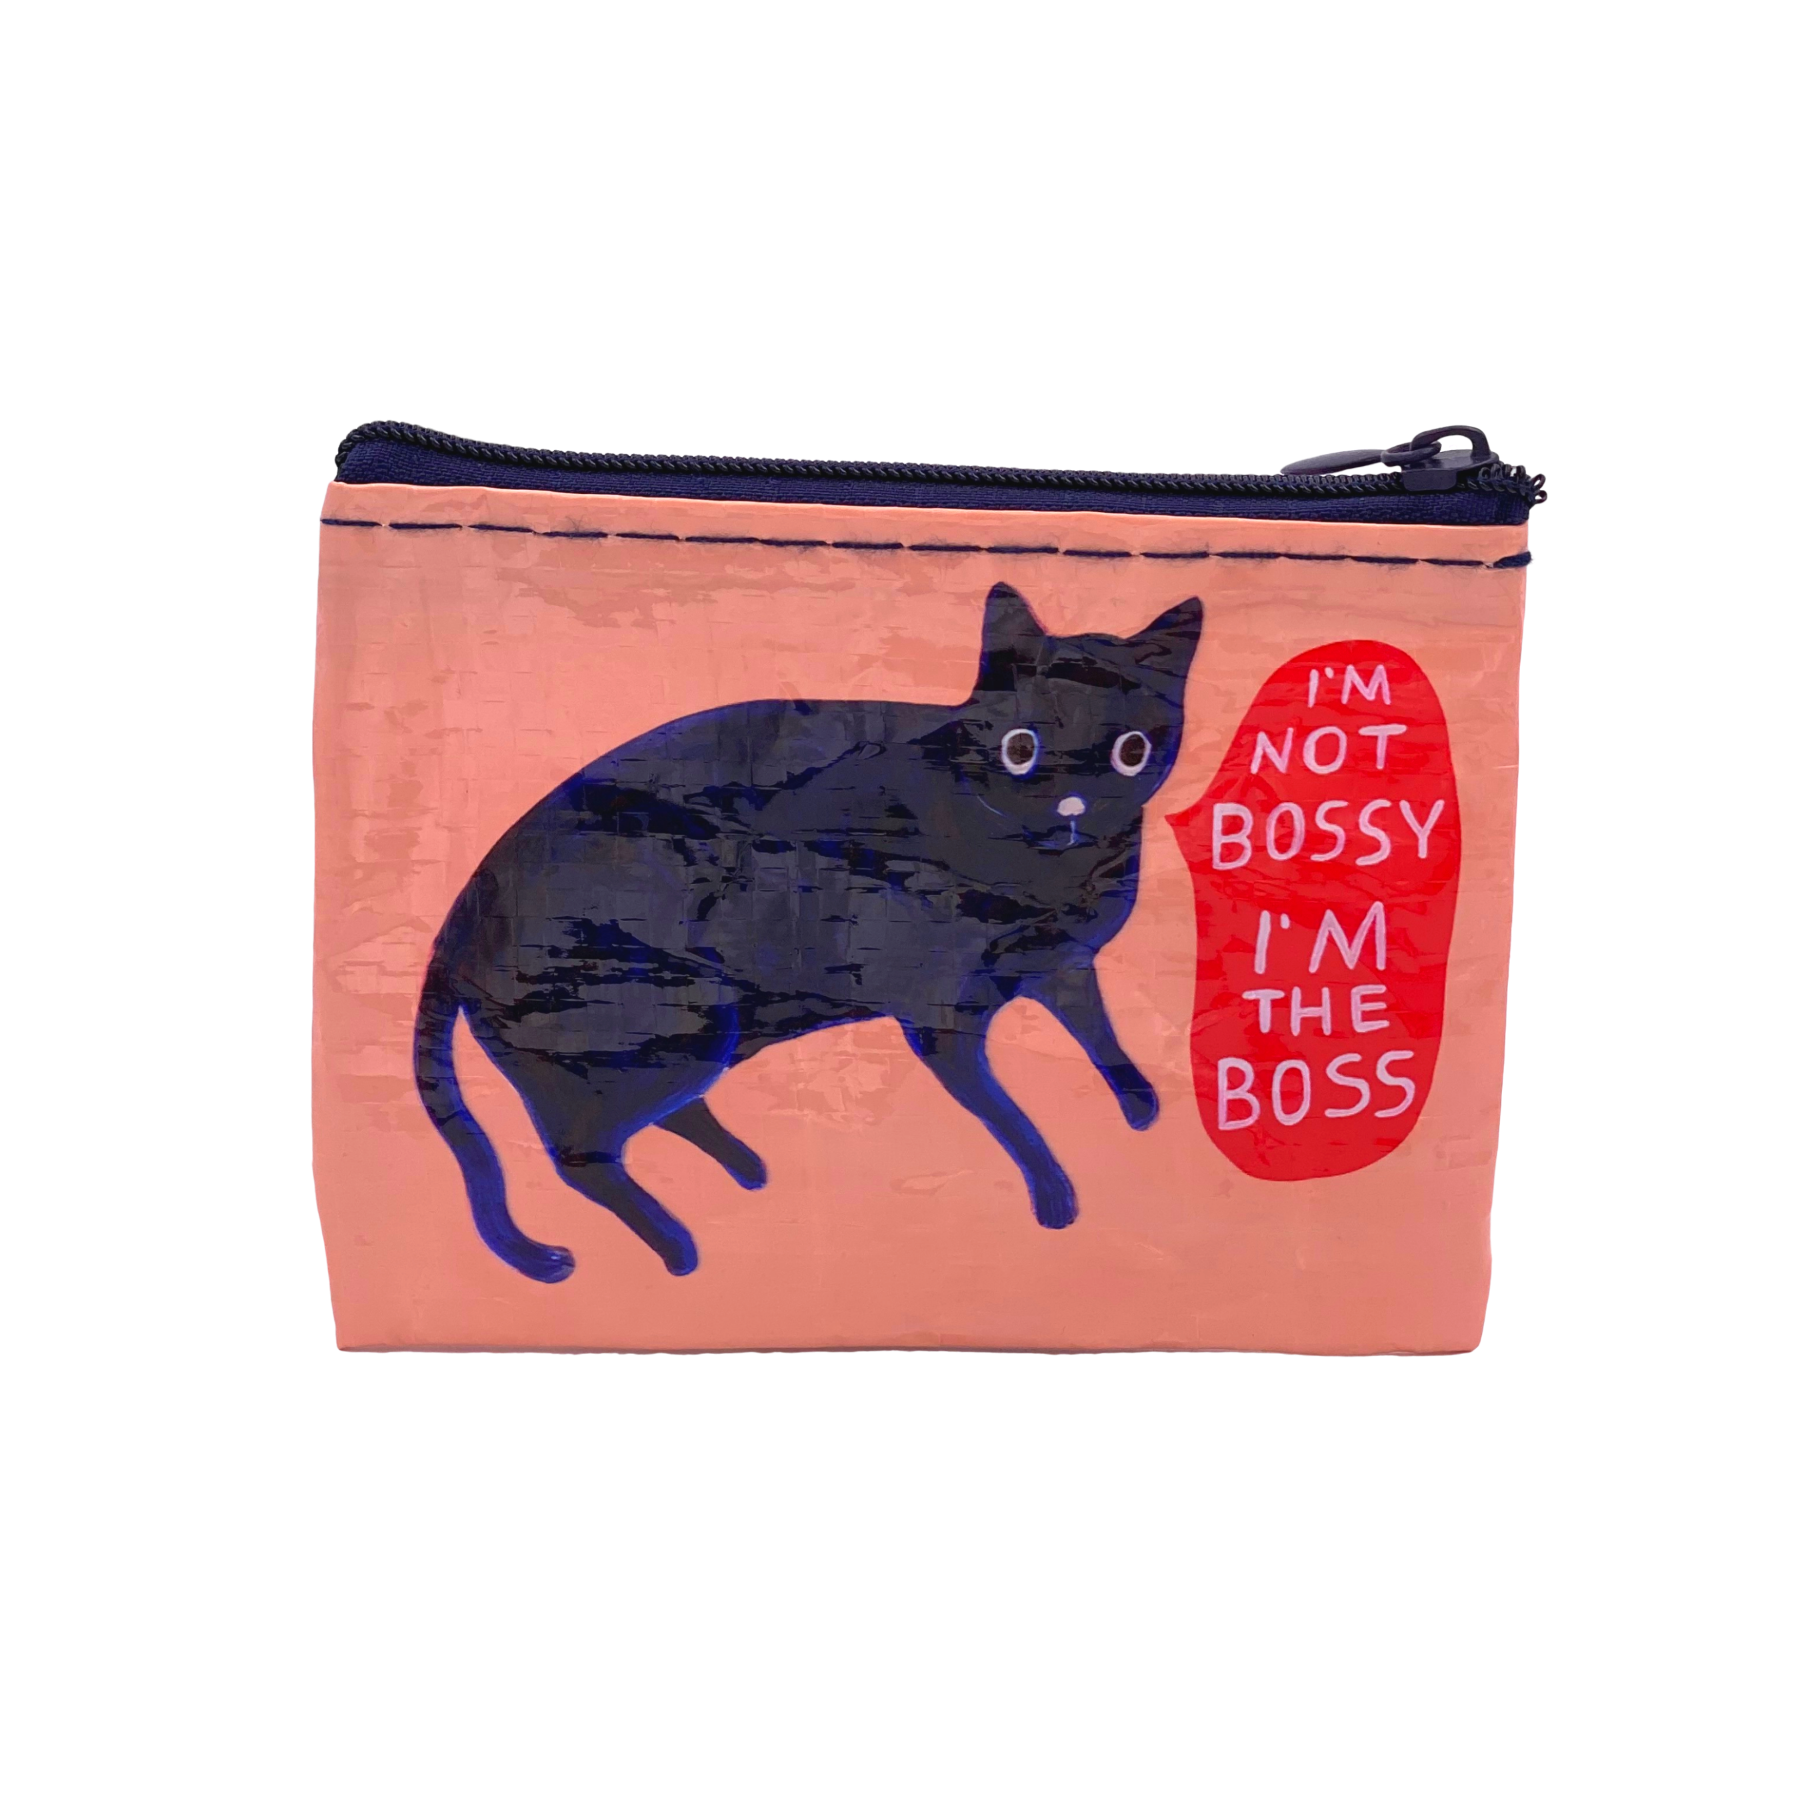 I'm not bossy i'm the boss Coin Purse